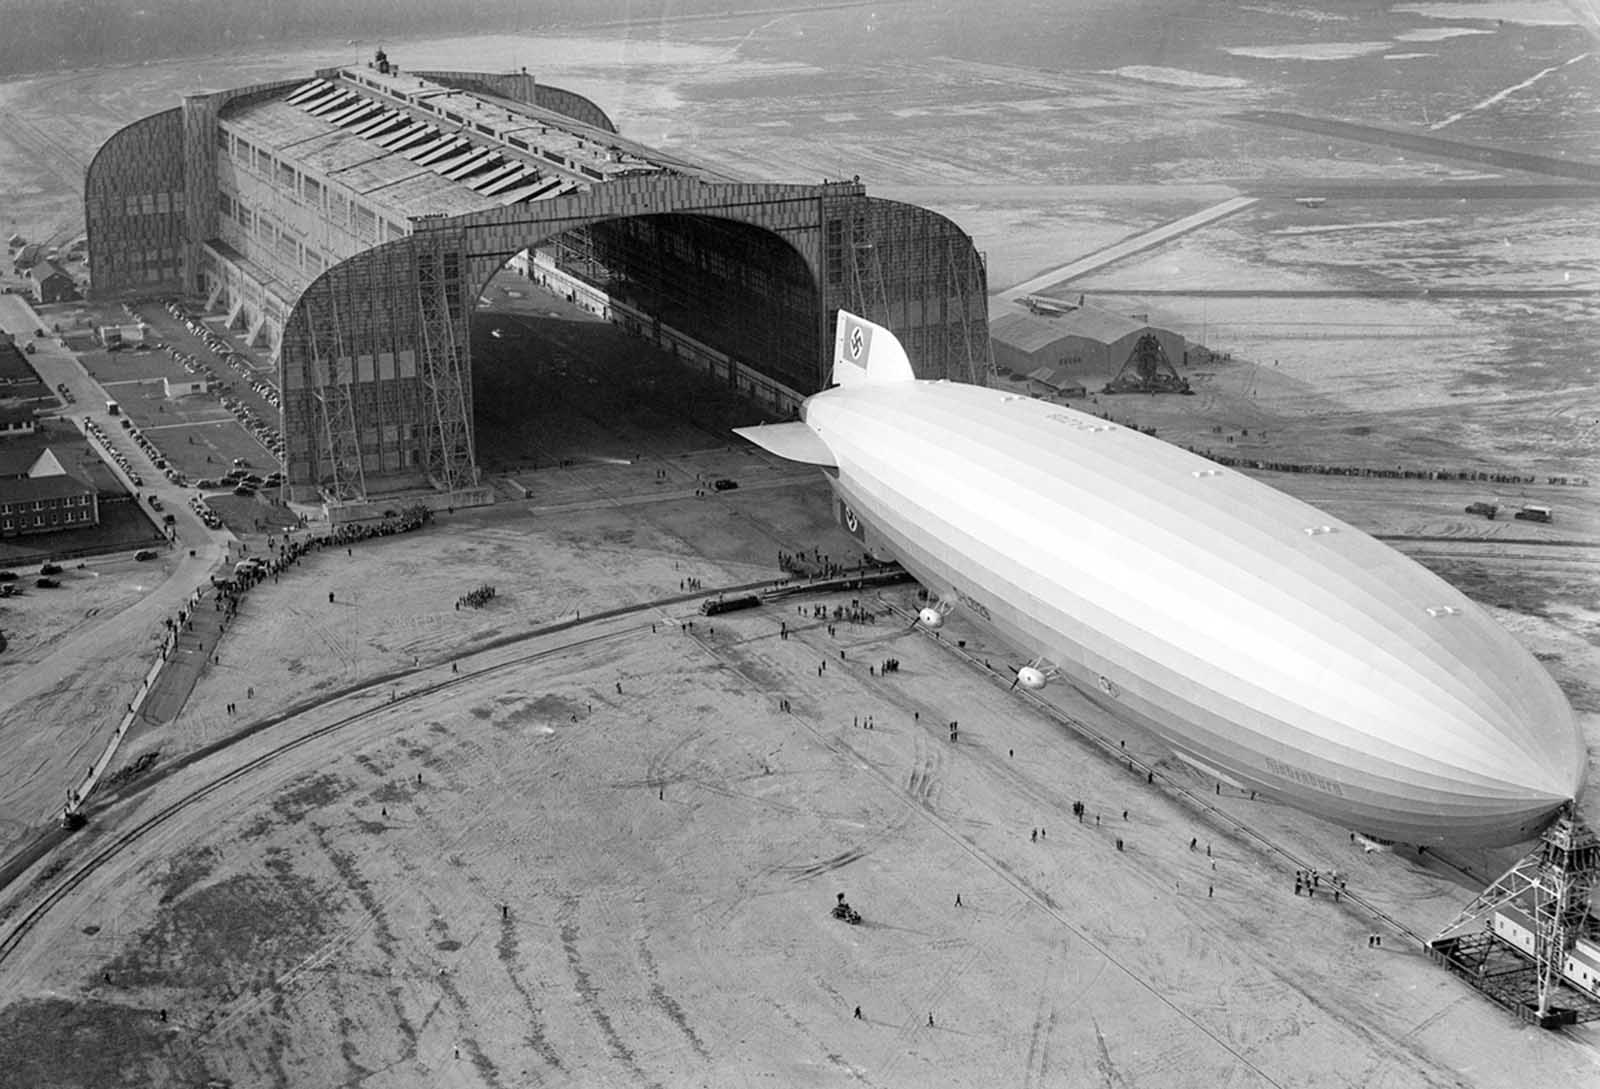 The Hindenburg trundles into the U.S. Navy hangar, its nose hooked to the mobile mooring tower, at Lakehurst, New Jersey, on May 9, 1936. The rigid airship had just set a record for its first north Atlantic crossing, the first leg of ten scheduled round trips between Germany and America. 